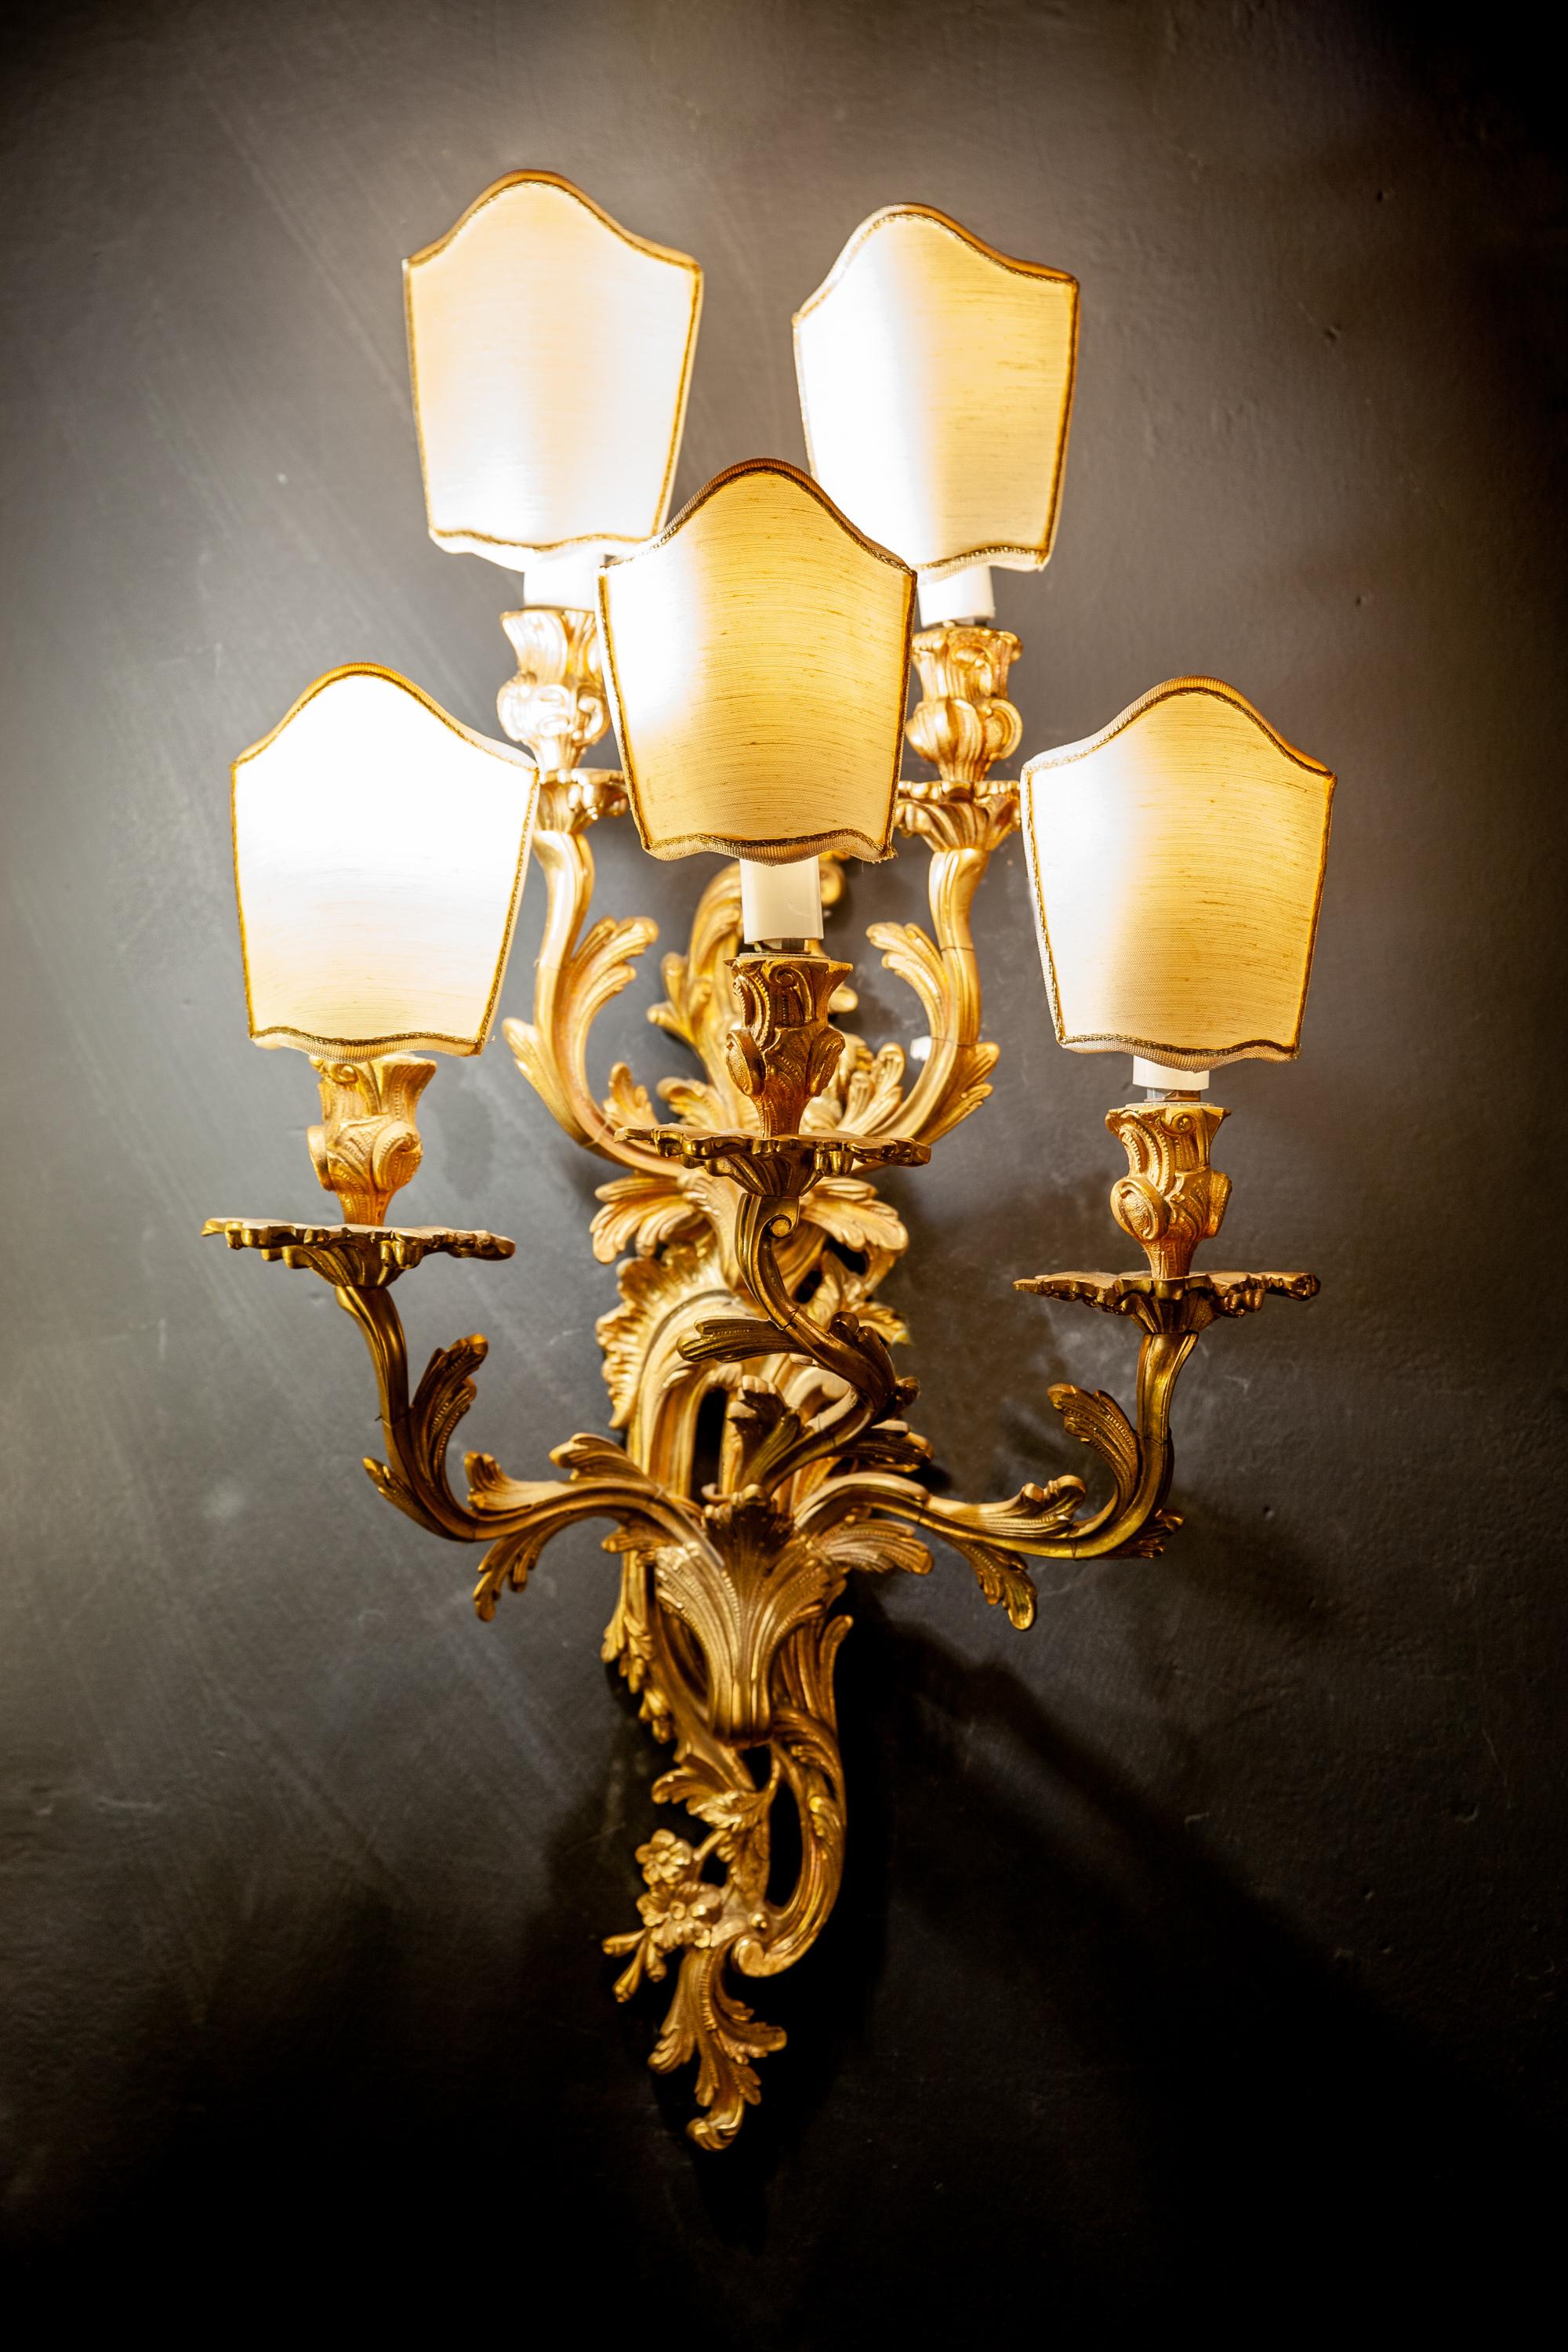 Pair of 19th Century Louis XV Style Gilt Bronze Five Arms French Sconces, 1890s (19. Jahrhundert)